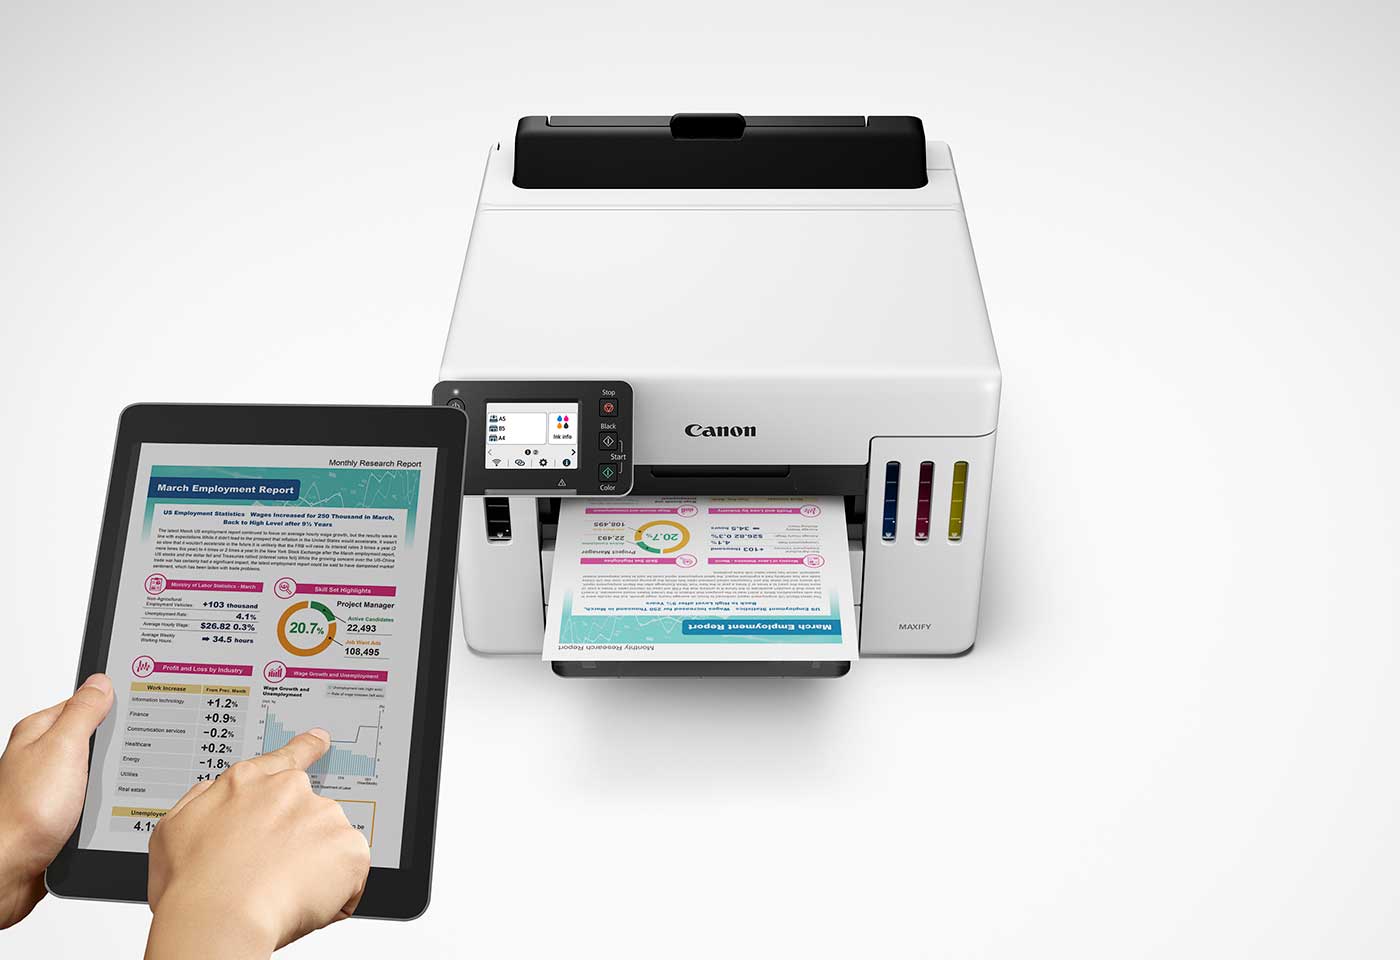 Image of MAXIFY GX5560 MegaTank printer connected to a tablet